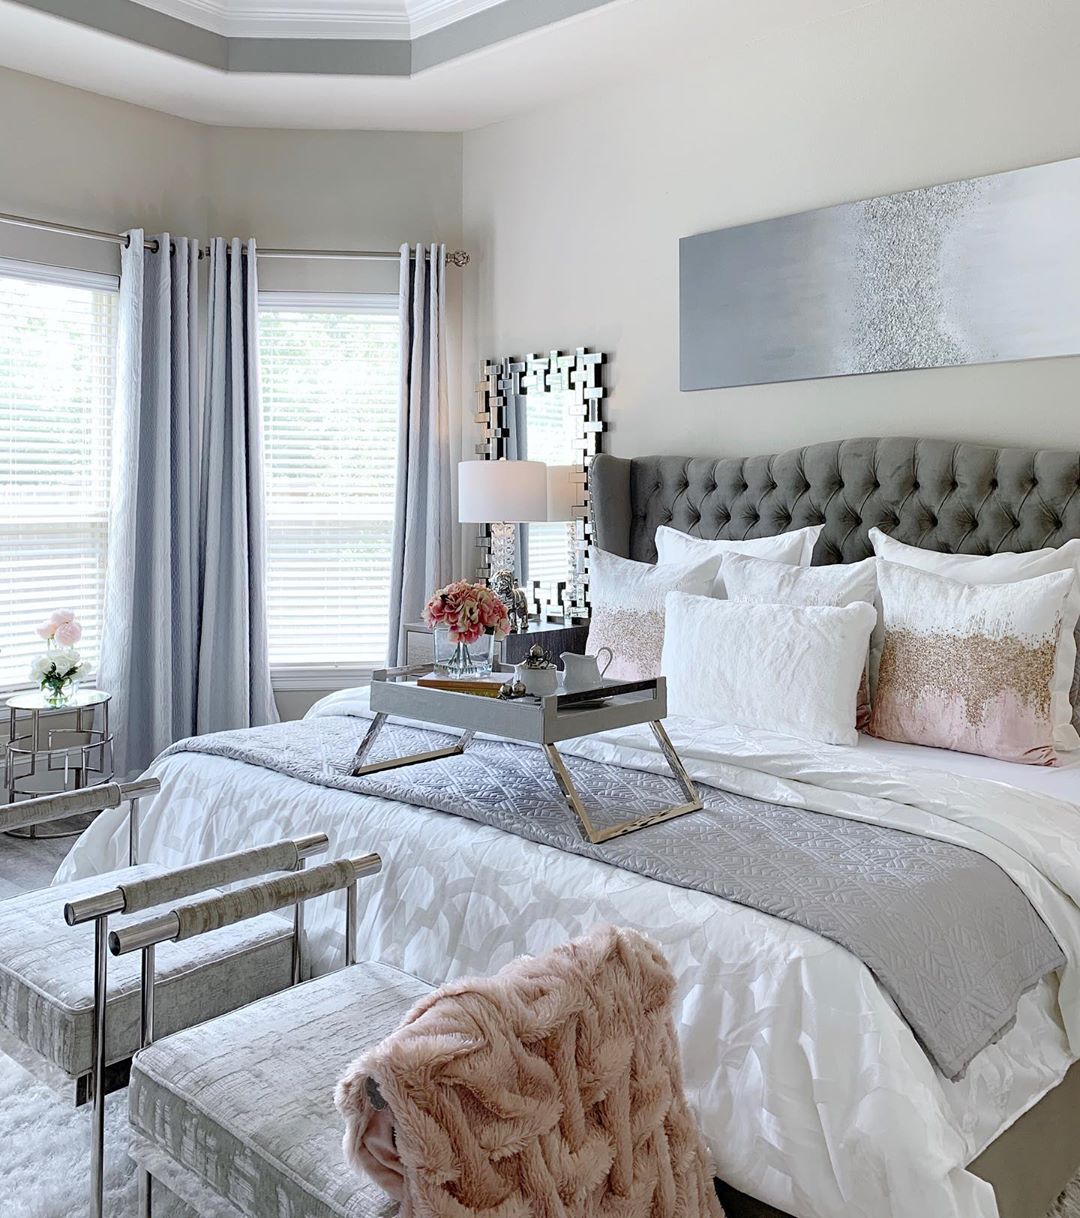 Staged contemporary bedroom. Photo by Instagram user @popsofcolorhome